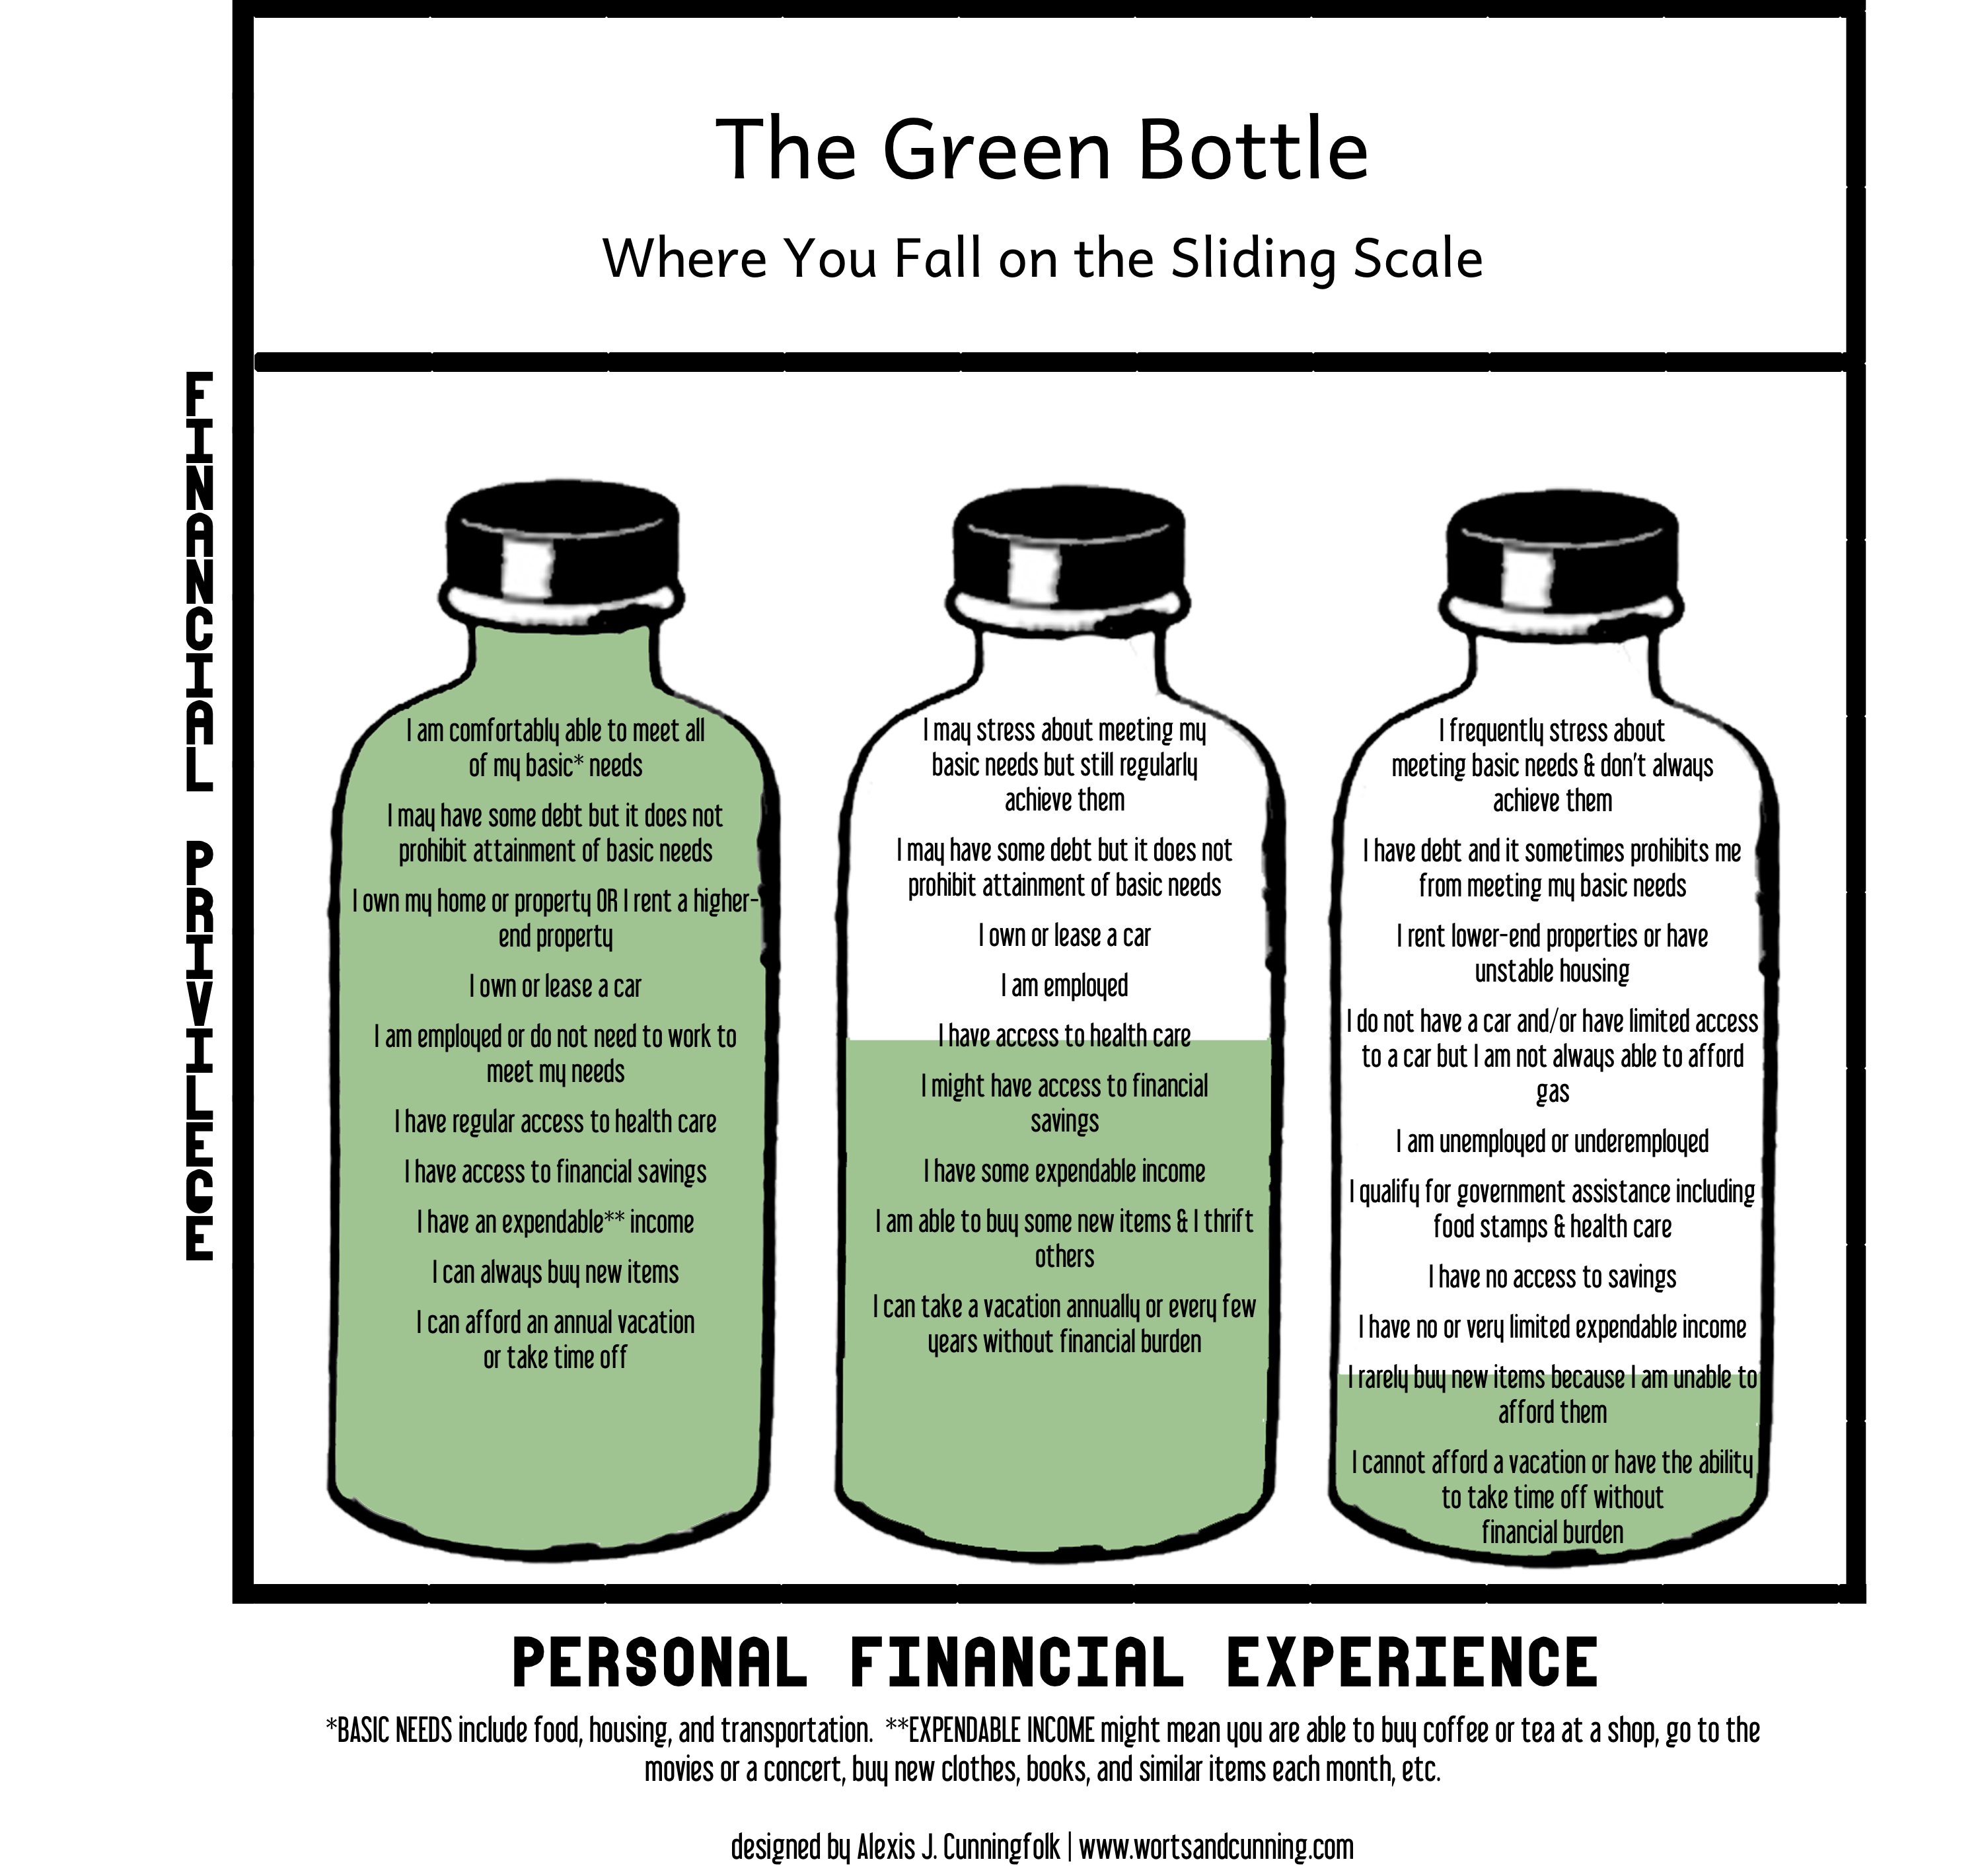 3 bottles under a heading The Green Bottle - where you fall on the sliding scale. Vertical axis is labeled financial privilege - how full the bottles are. Horizontal axis is labeled Personal Financial Experience - what you experience inside each bottle. Bottle on left is full. It says: I am comfortably able to meet all of my basic needs; I may have some debt but it does not prohibit attainment of basic needs; I own my home OR I rent a higher end property; I own or lease a car; I am employed OR do not need to work to meet my needs; I have regular access to health care and financial savings; I have expendable income; I can always buy new items; I can afford time off or a vacation. Middle bottle is half full. It says: I may stress about meeting my basic needs but still regularly achieve them; I may have some debt but it does not prohibit attainment of basic needs; I own or lease a car; I am employed; I have access to health care; I might have access to financial savings; I have some expendable income; I am able to buy some new items and thrift others; I can take a vacation annually or every few years without financial burden. Bottle on the right has very little and says: I frequently stress about meeting my basic needs and don't always achieve them; I have debt and sometimes it prohibits me from meeting my basic needs; I rent lower-end properties or have unstable housing; I do not have a car and/or have limited access to a car but am not always able to afford gas; I am unemployed or underemployed; I qualify for government assistance including food stamps and health care; I have no or very limited expendable income; I rarely buy new items because I am unable to afford them; I cannot afford a vacation or have the ability to take time off without financial burden. Bottom says that Basic Needs include food, housing, and transportation. Expendable income means you are able to buy a coffee, go to the movies or a concert, buy a new book or clothing or similar items every month, etc. Designed by Alexis J. Cunningfolk at WortsAndCunning.com